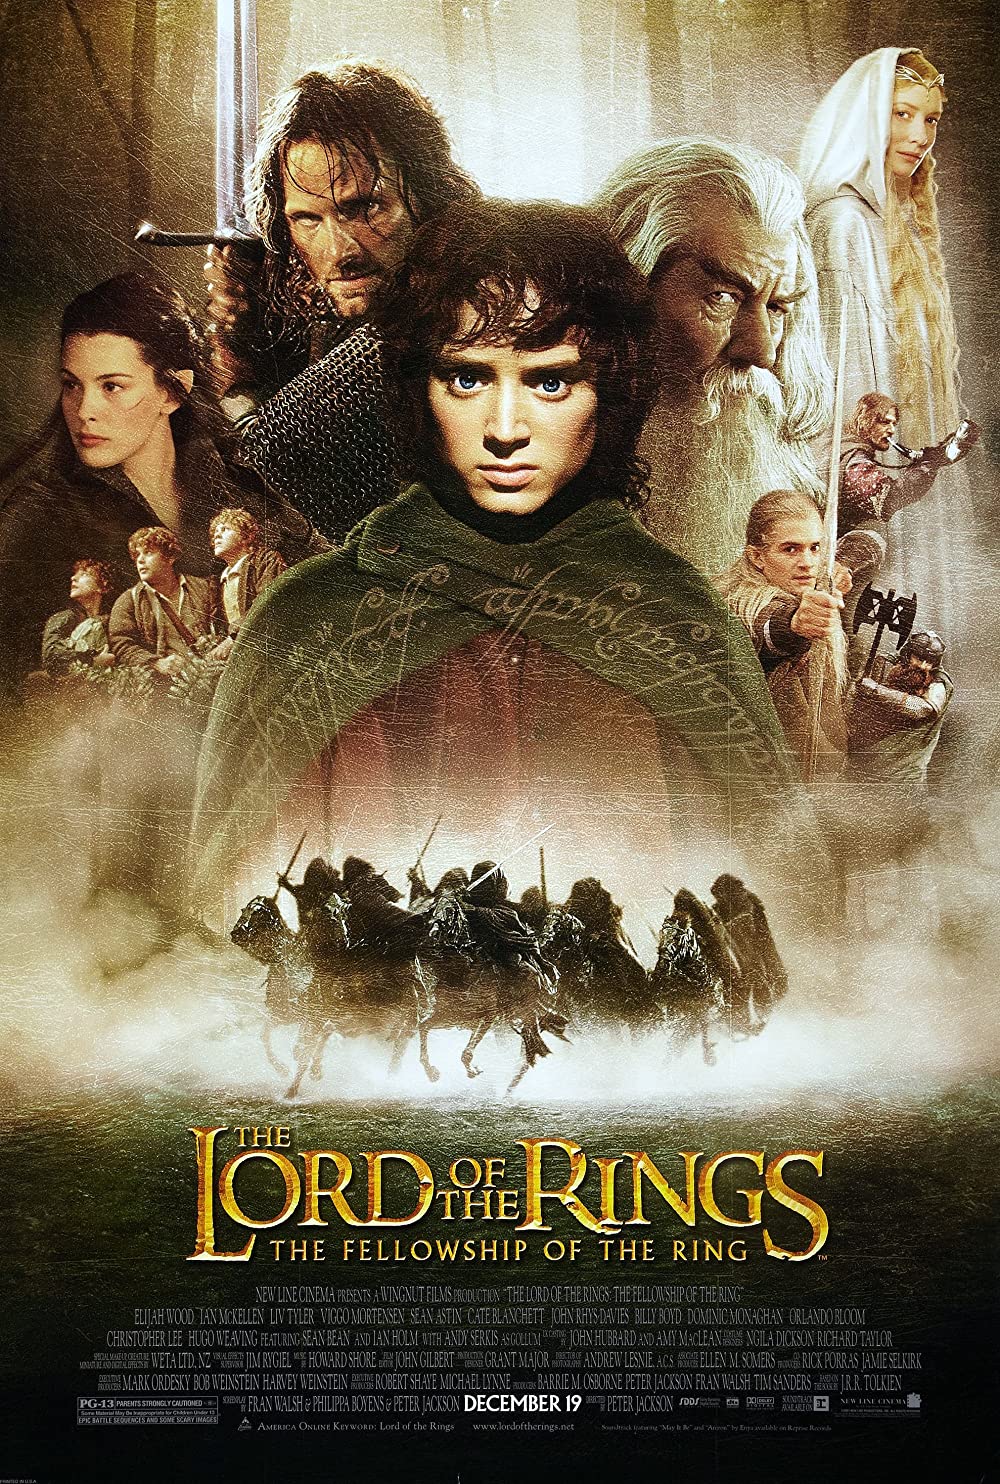 The Lord of the Rings: The Fellowship of the Ring, Screen Drafts Wiki